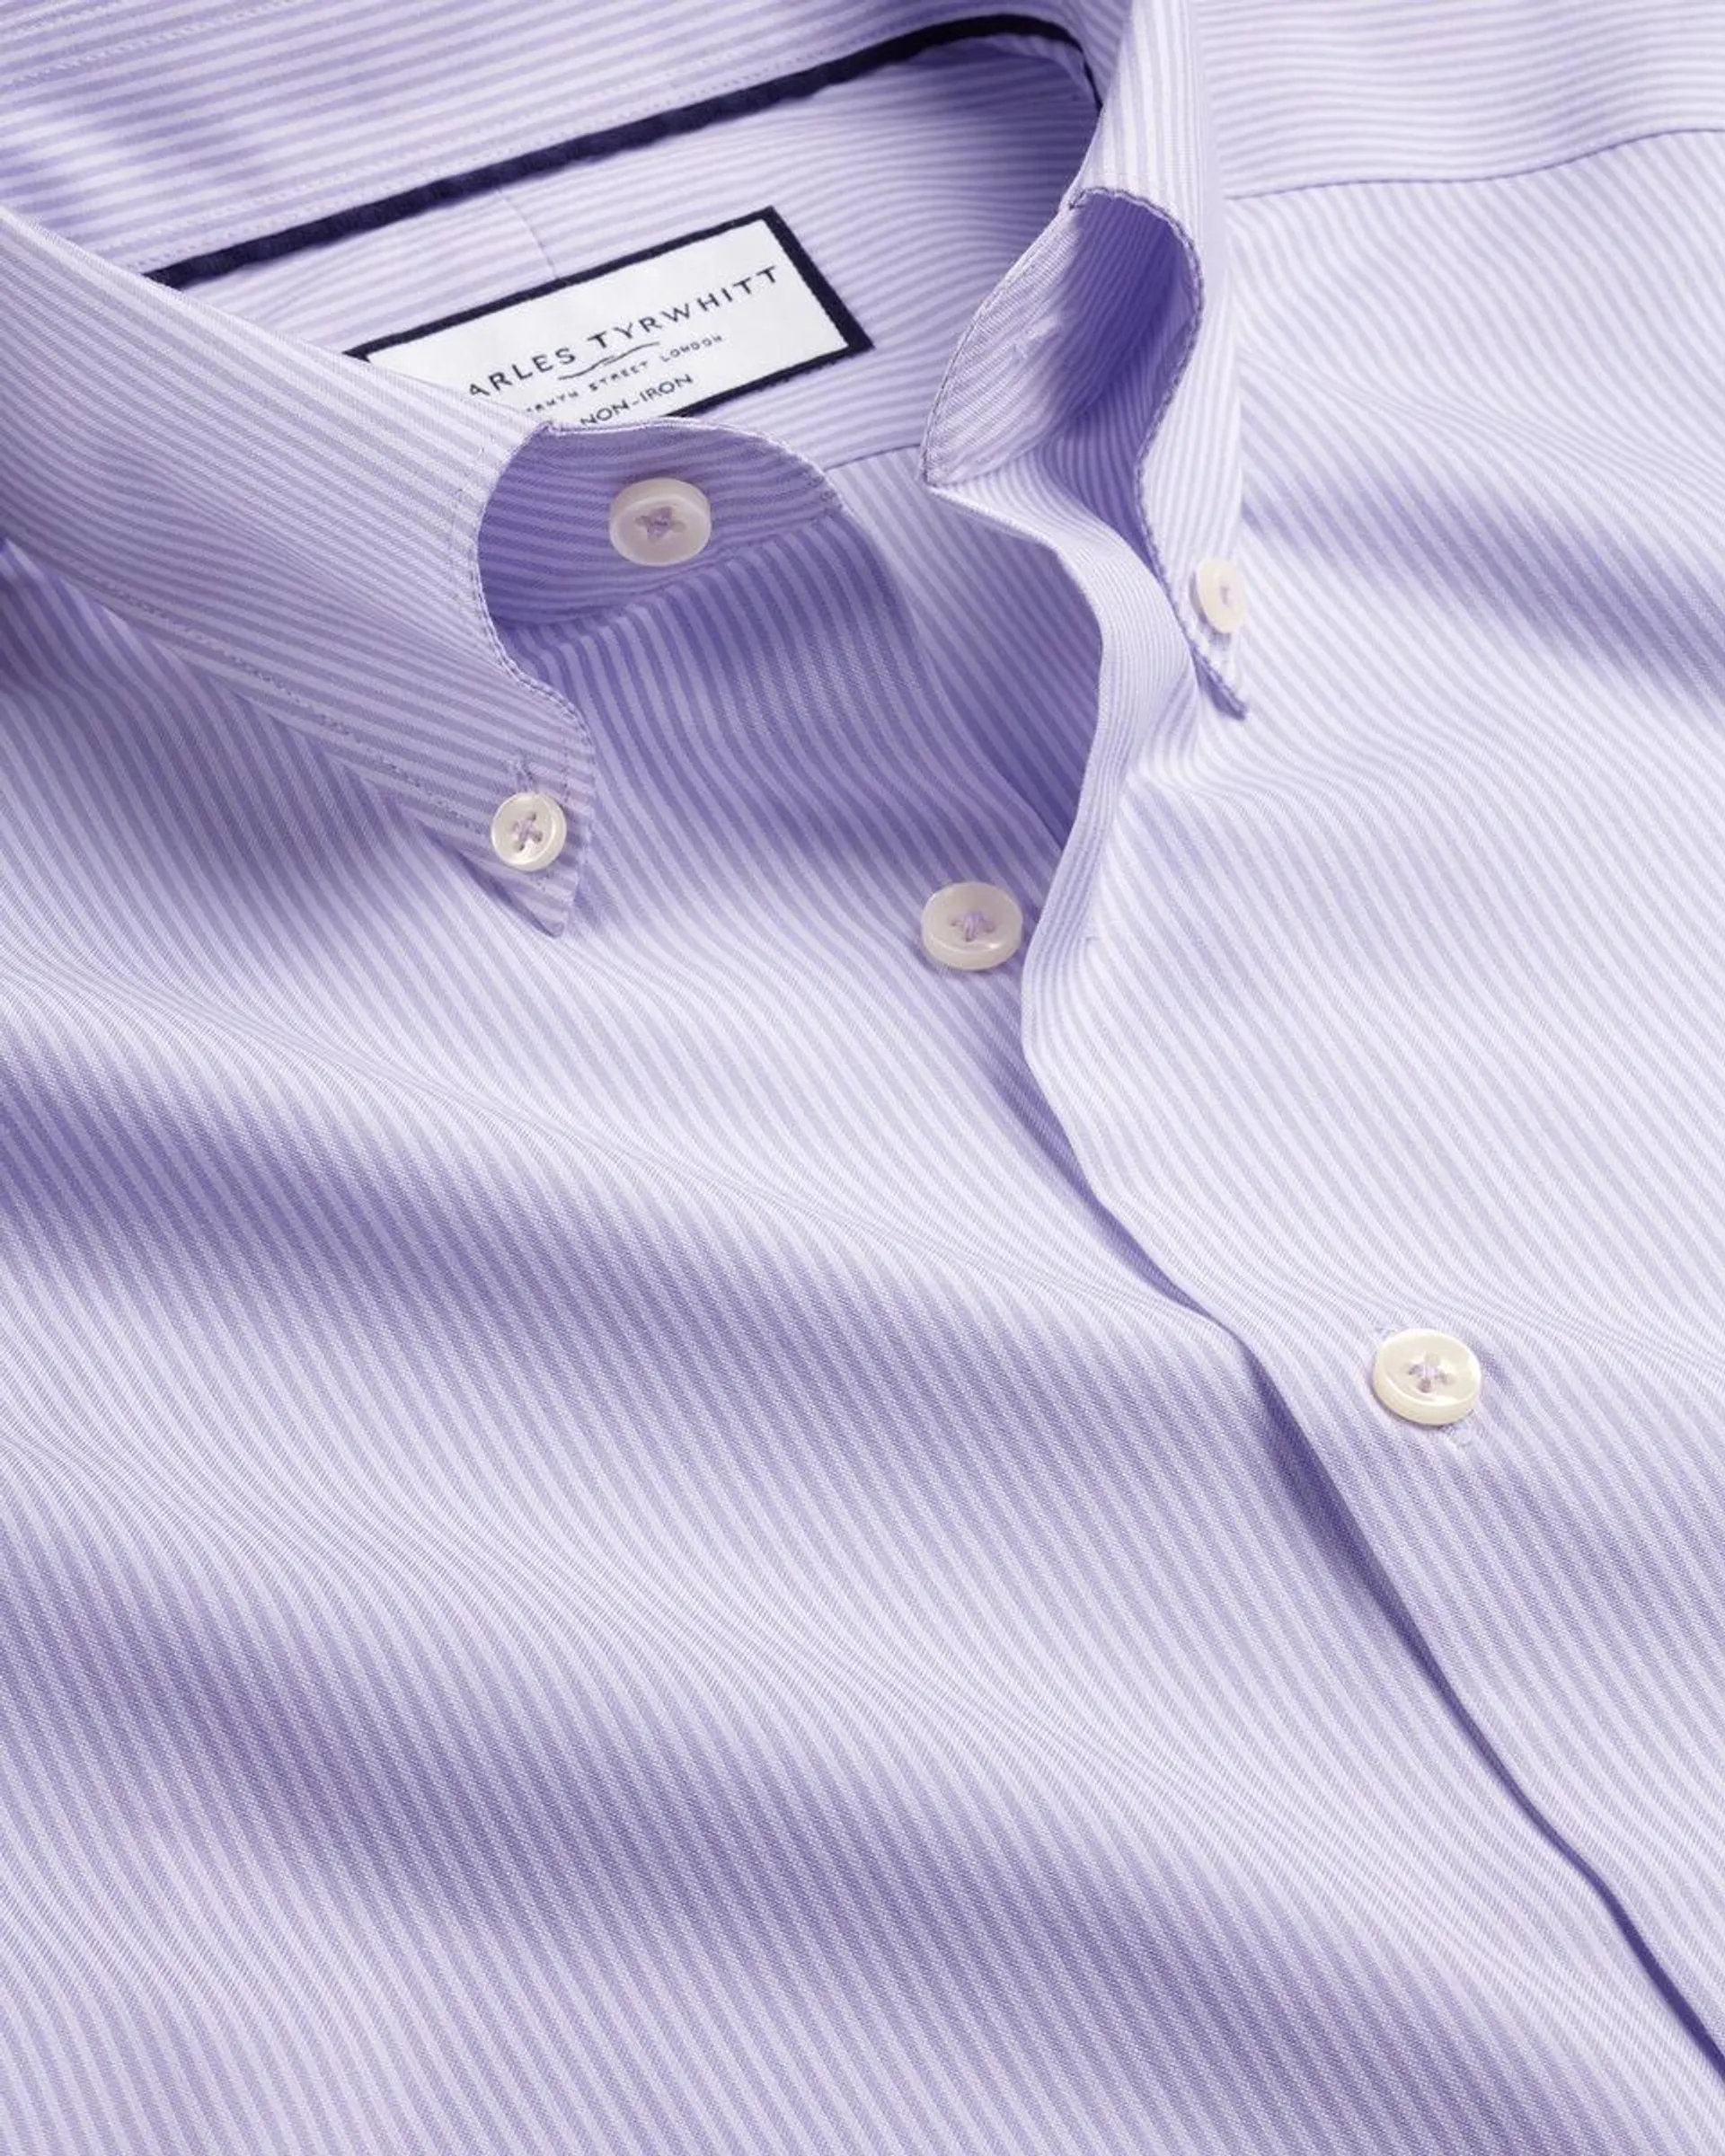 details about product: Button-Down Collar Non-Iron Stripe Oxford Shirt - Lilac Purple